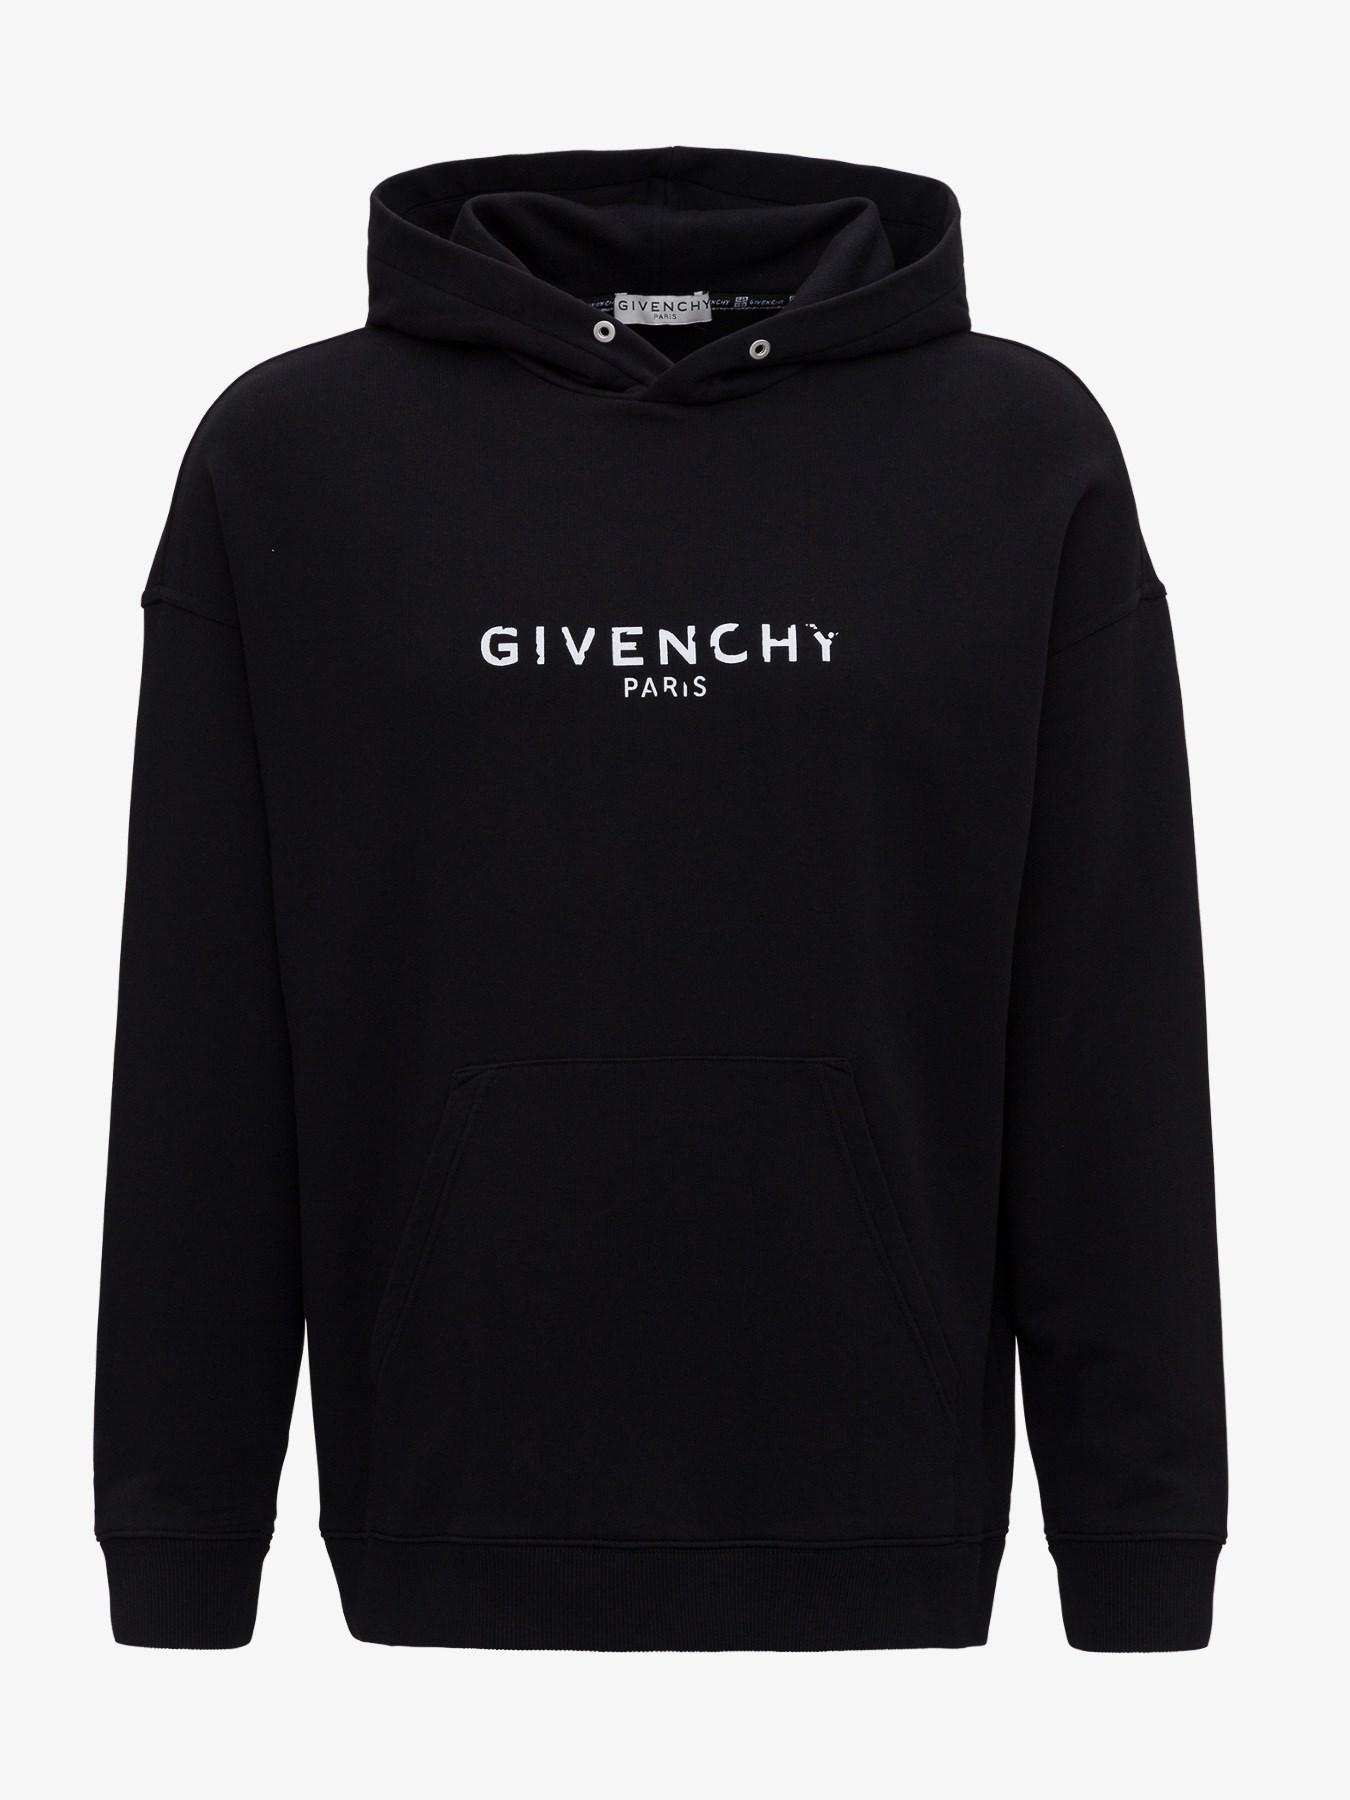 Givenchy Cotton Hoodie Sweater With Logo in Black for Men - Lyst